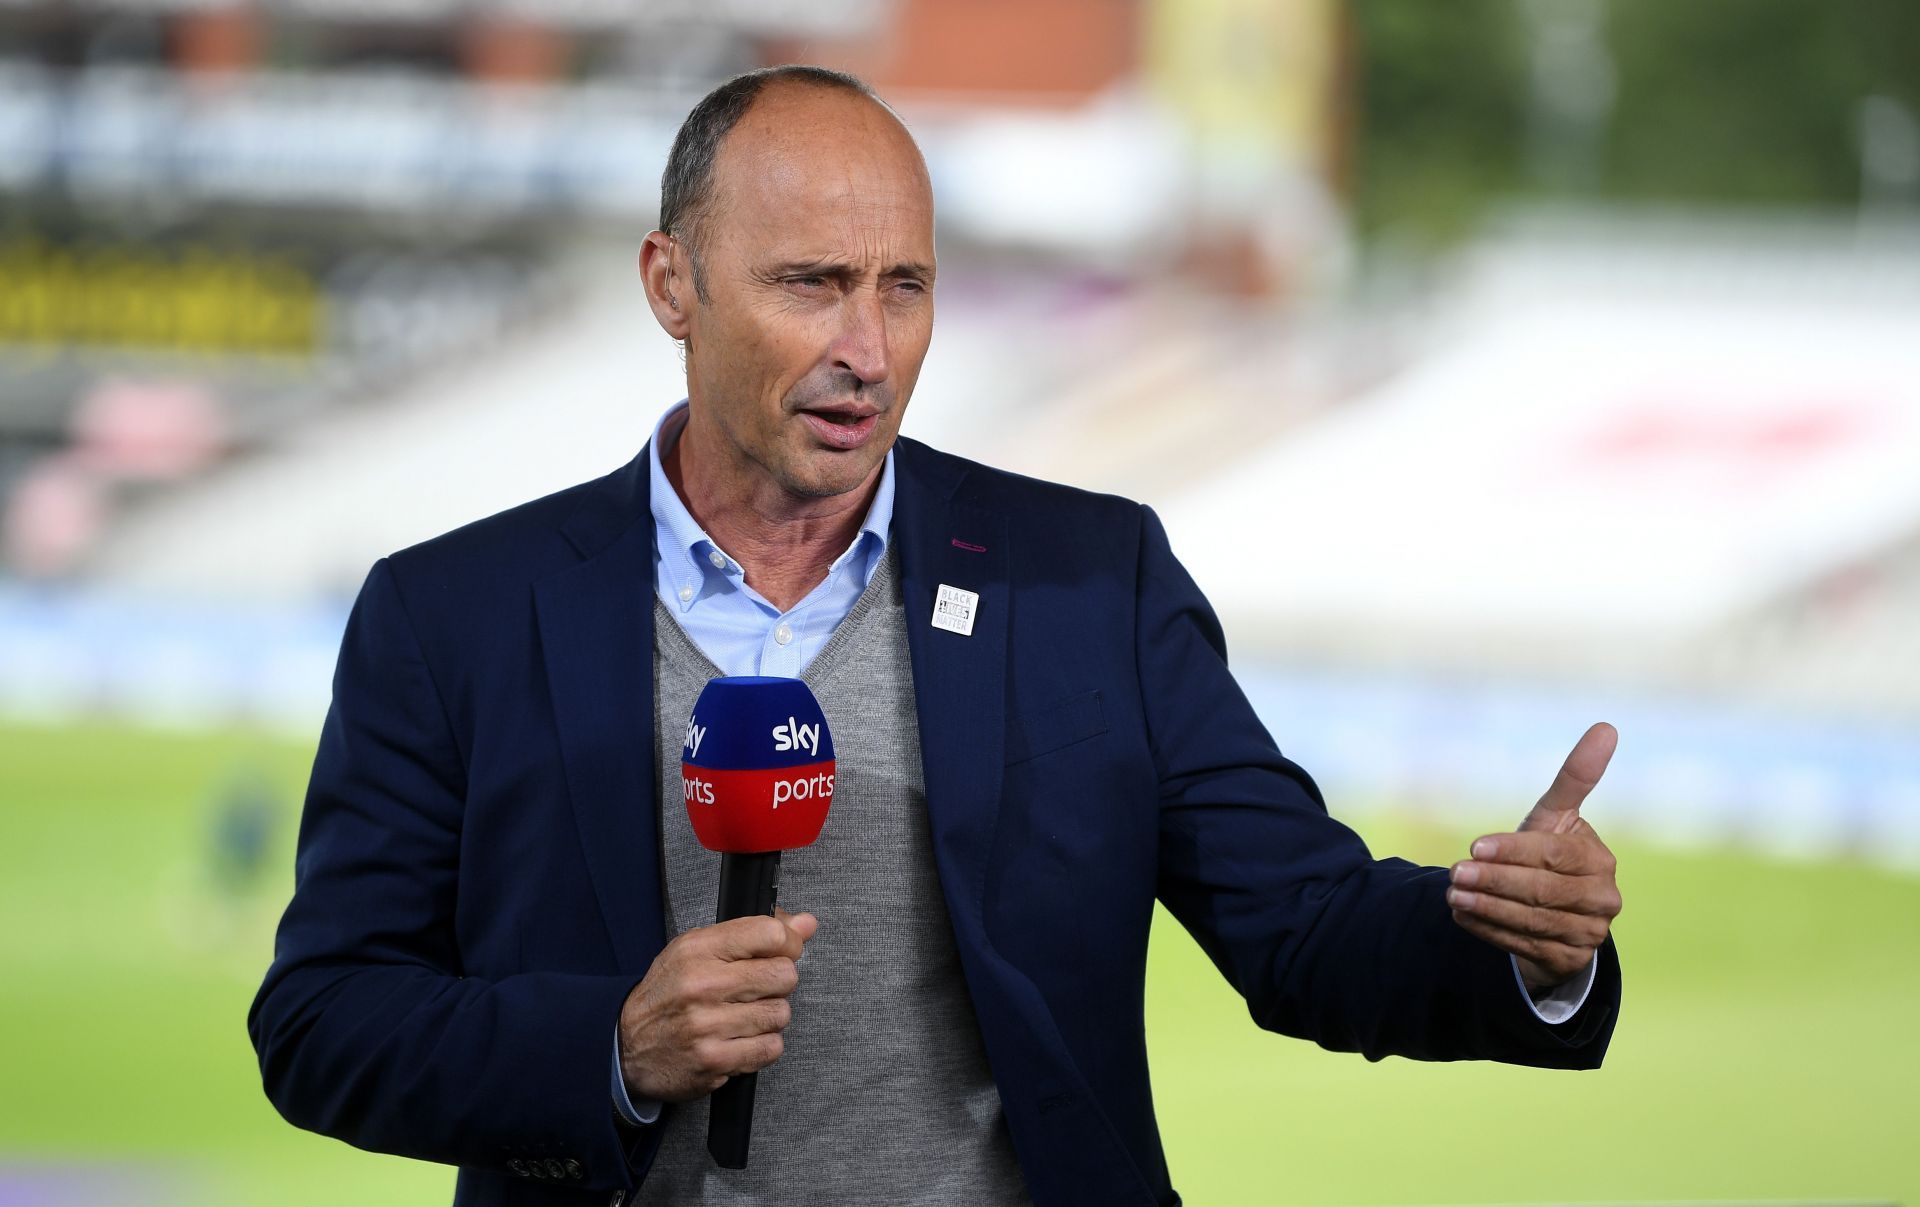 Nasser Hussain wants fans to sympathize with Babar Azam. (Image Credits: Getty)